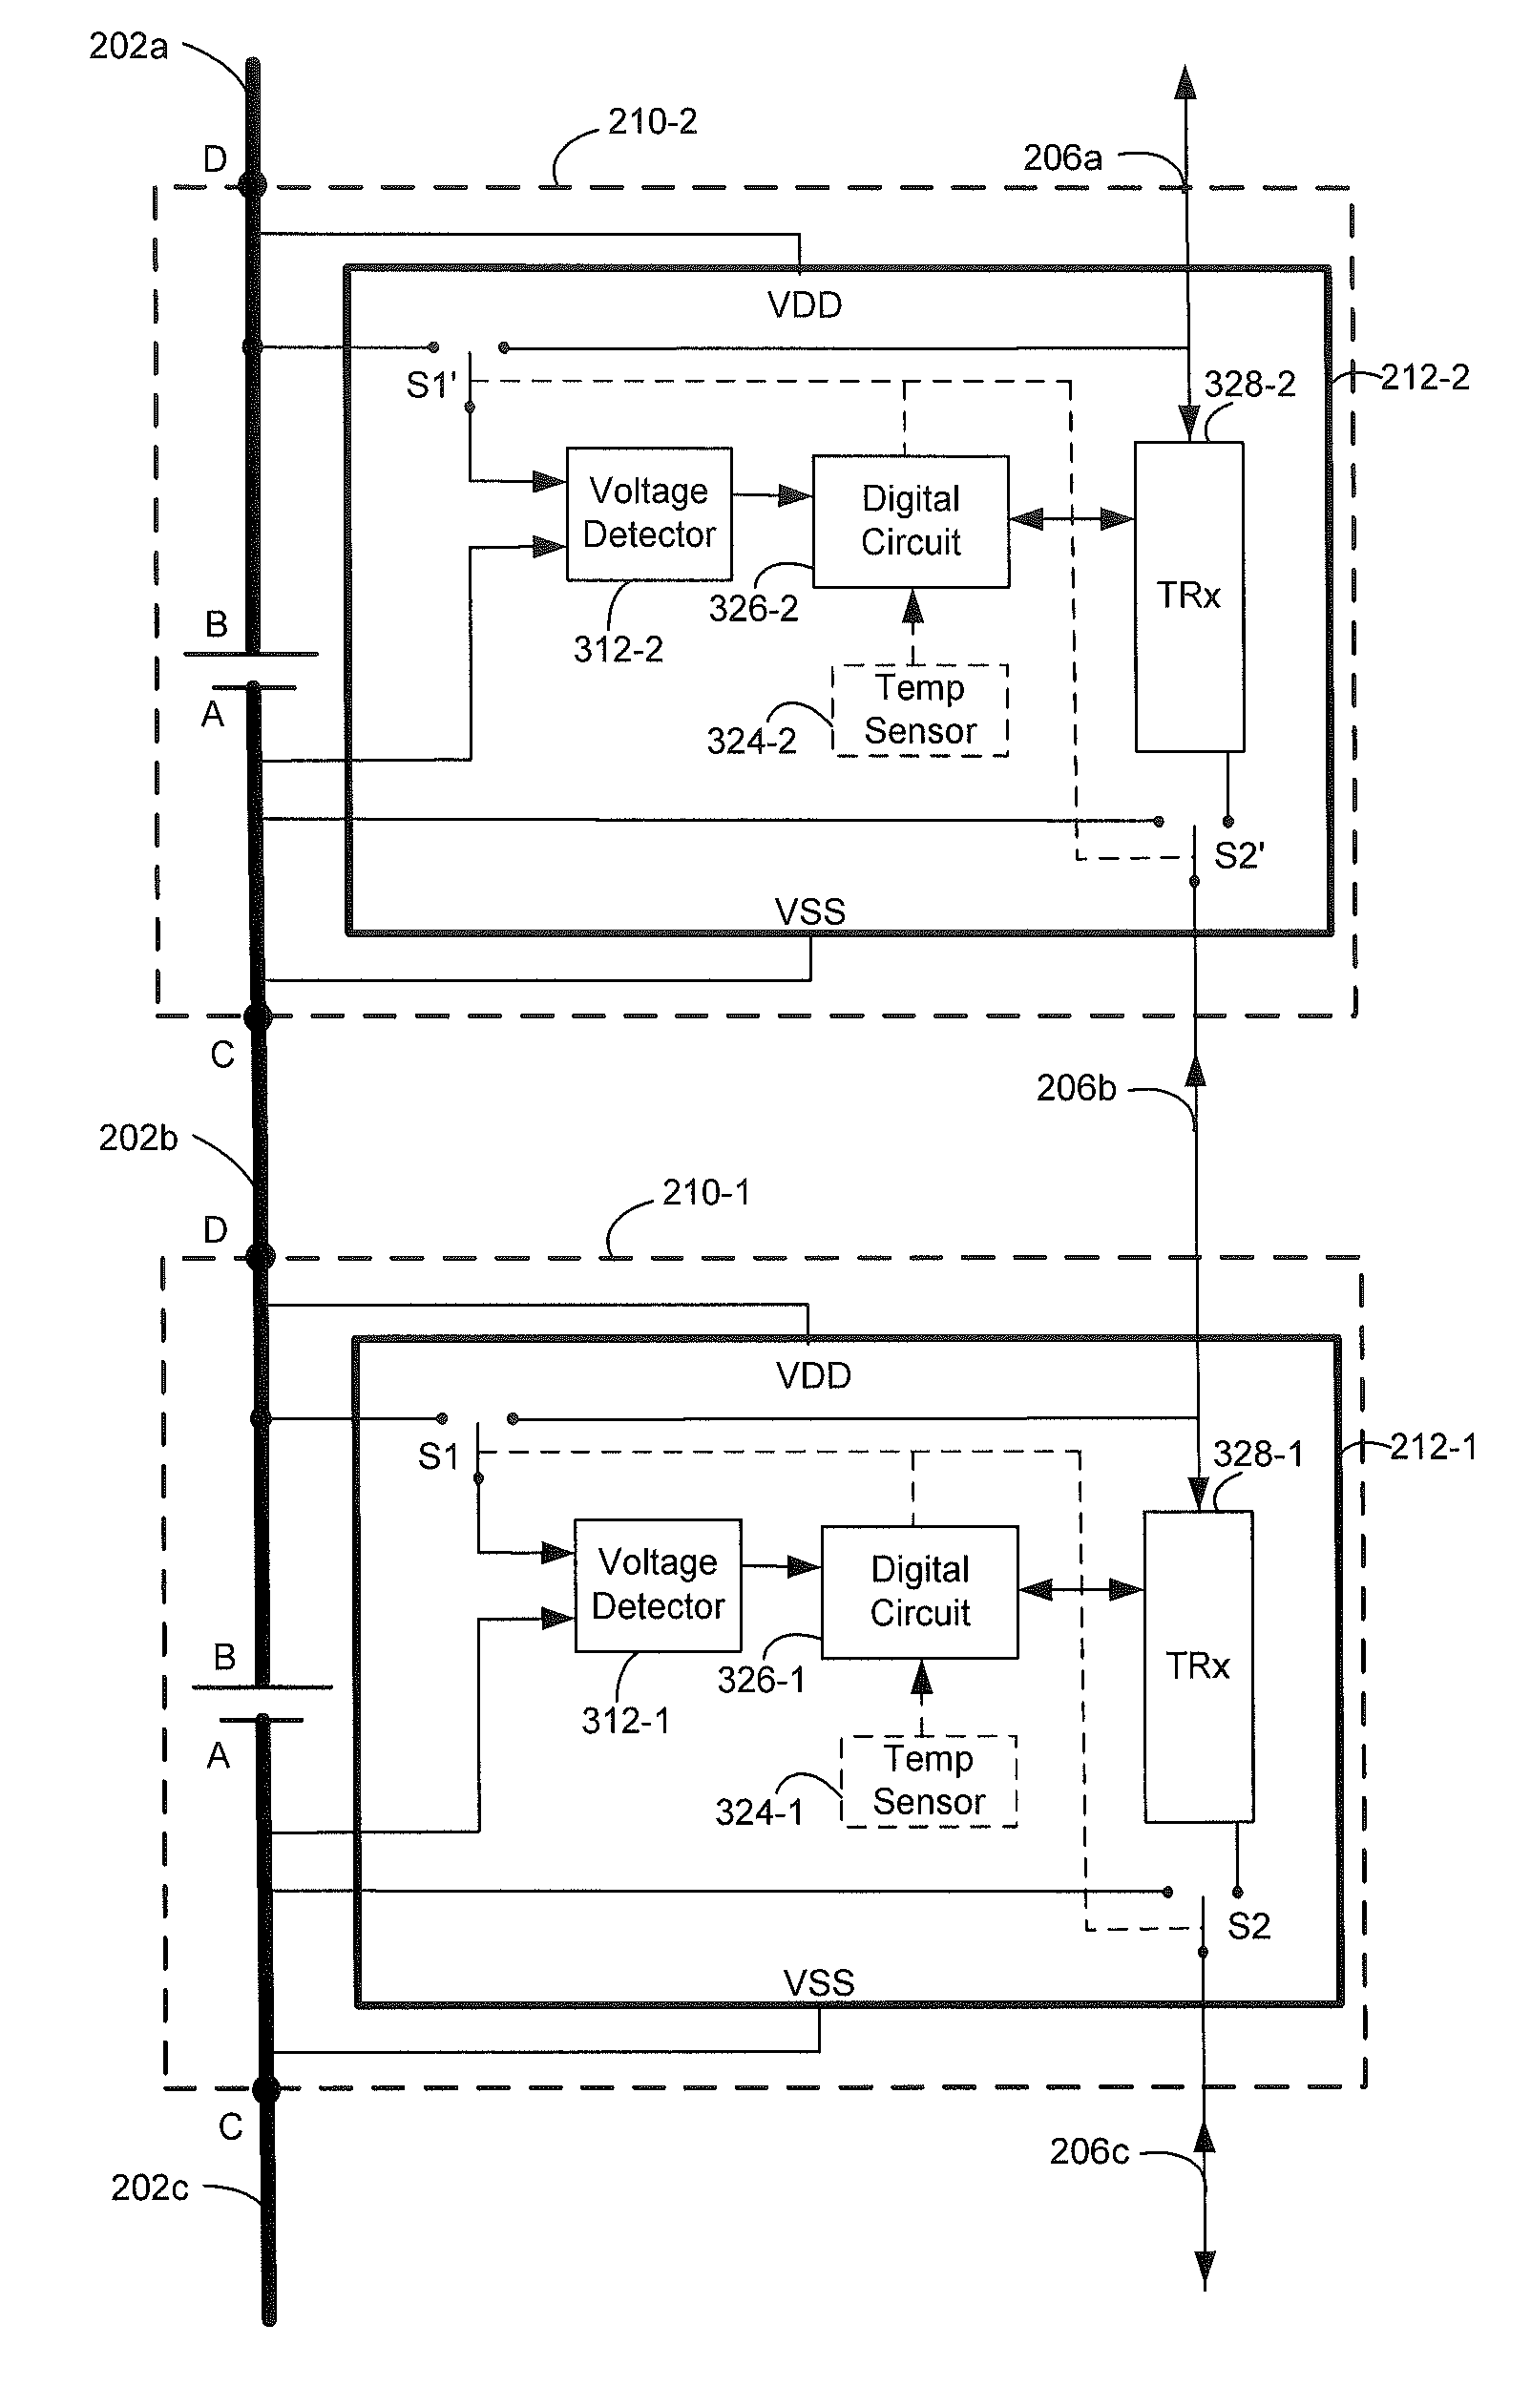 Method and Apparatus for Contact Detection in Battery Packs